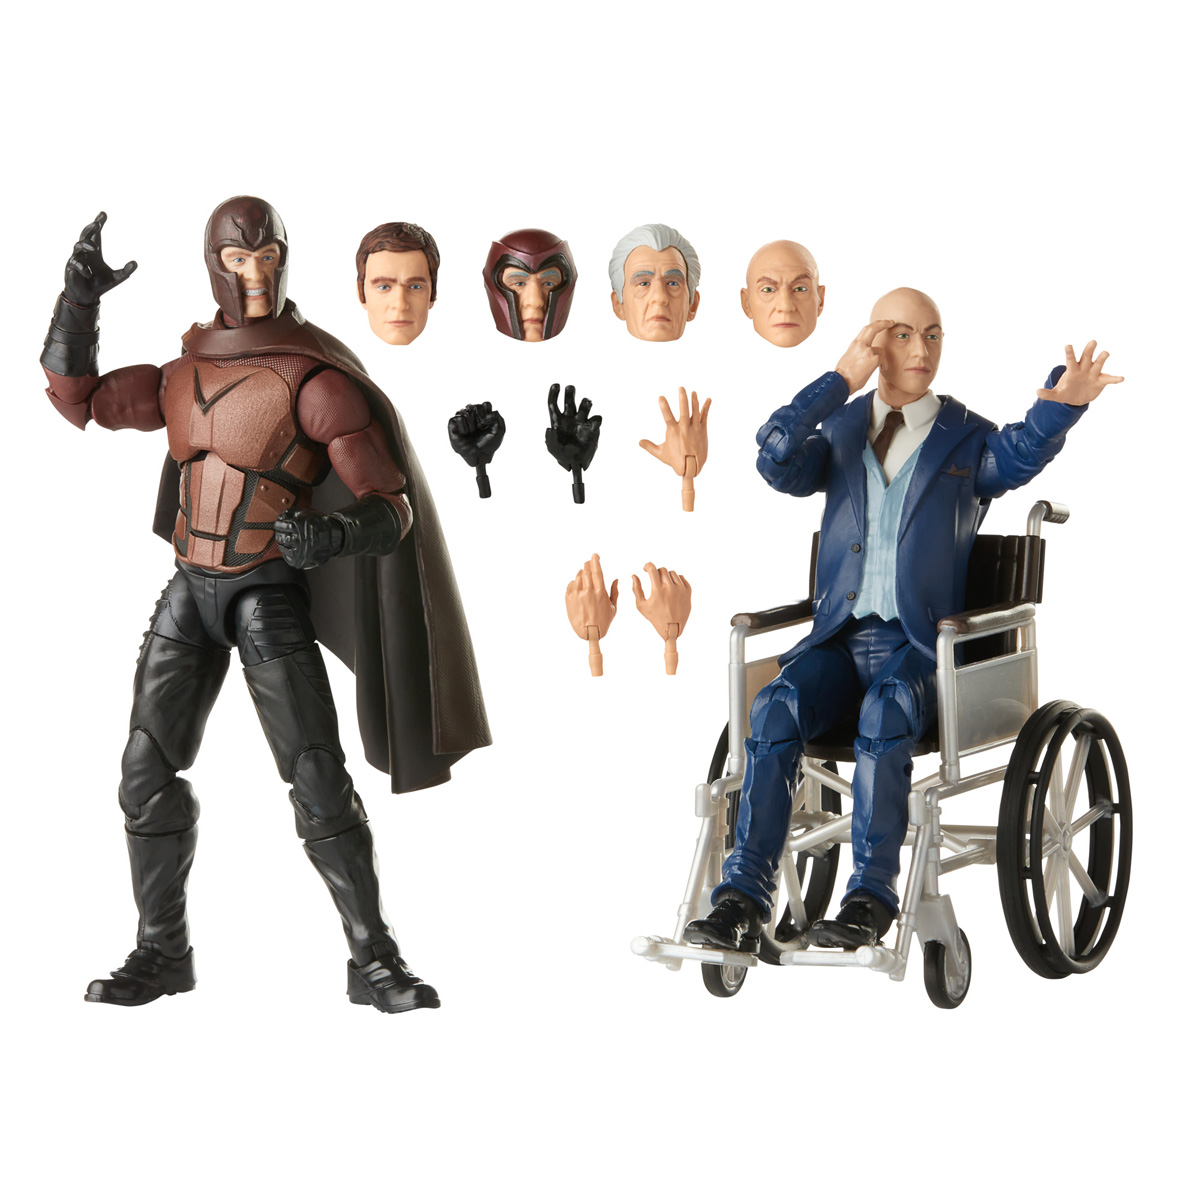 Marvel Legends Series X Men 20th Anniversary 6 Inch Magneto and Professor X Figure 2 Pack Oop 7